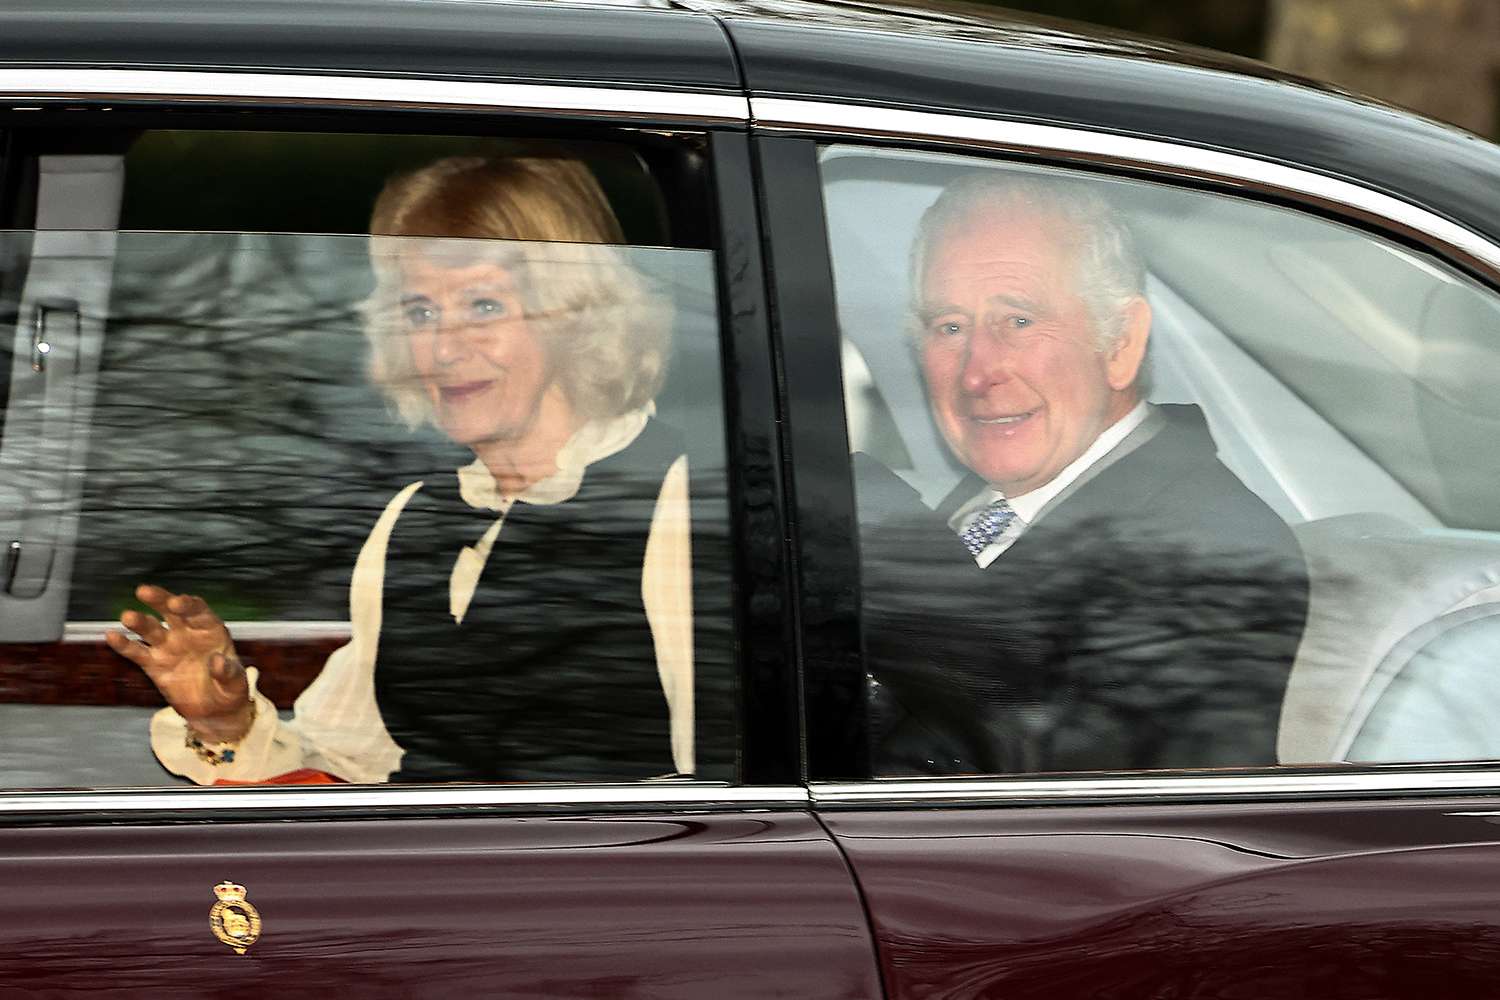 king-charles-iii-queen-camilla-leave-clarence-house-020624-2-4a090850b527430c919c0e7bac409390.jpg